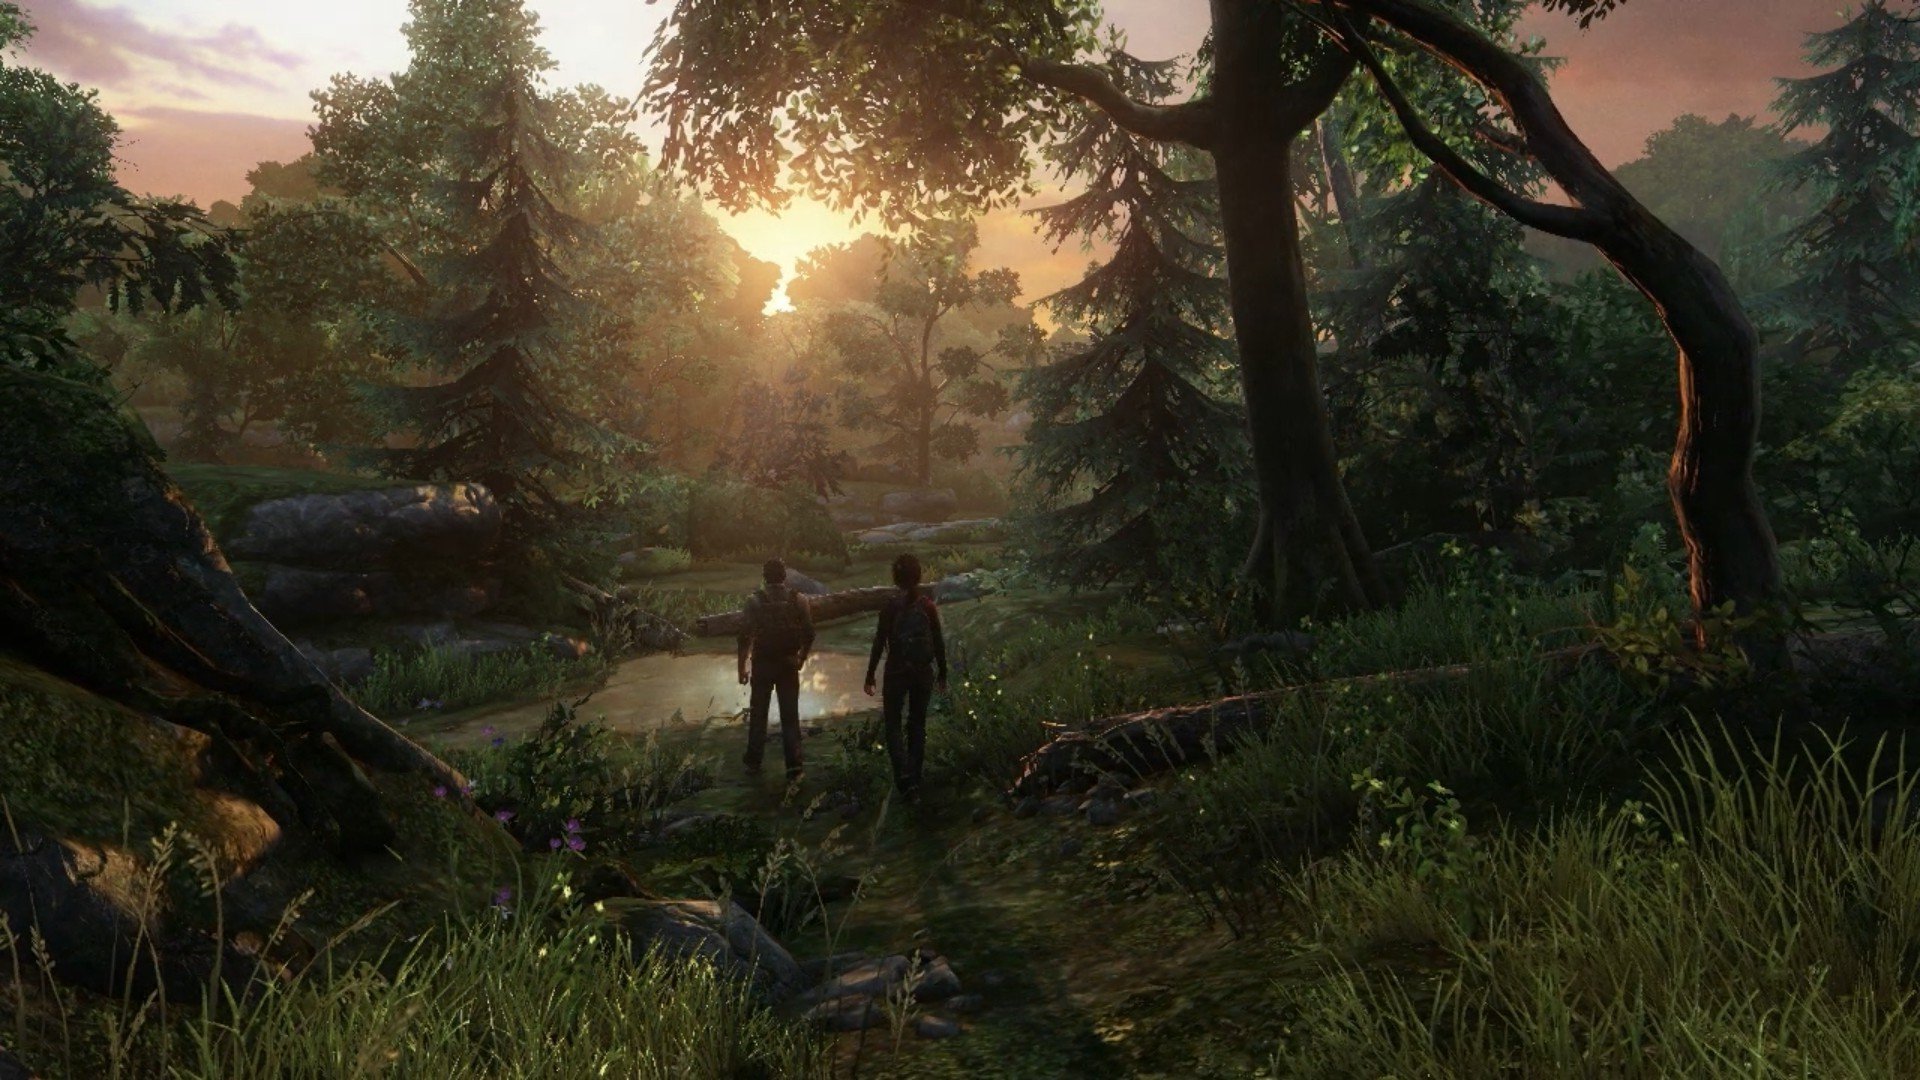 Hdq-the Last Of Us 2016 High Quality - HD Wallpaper 